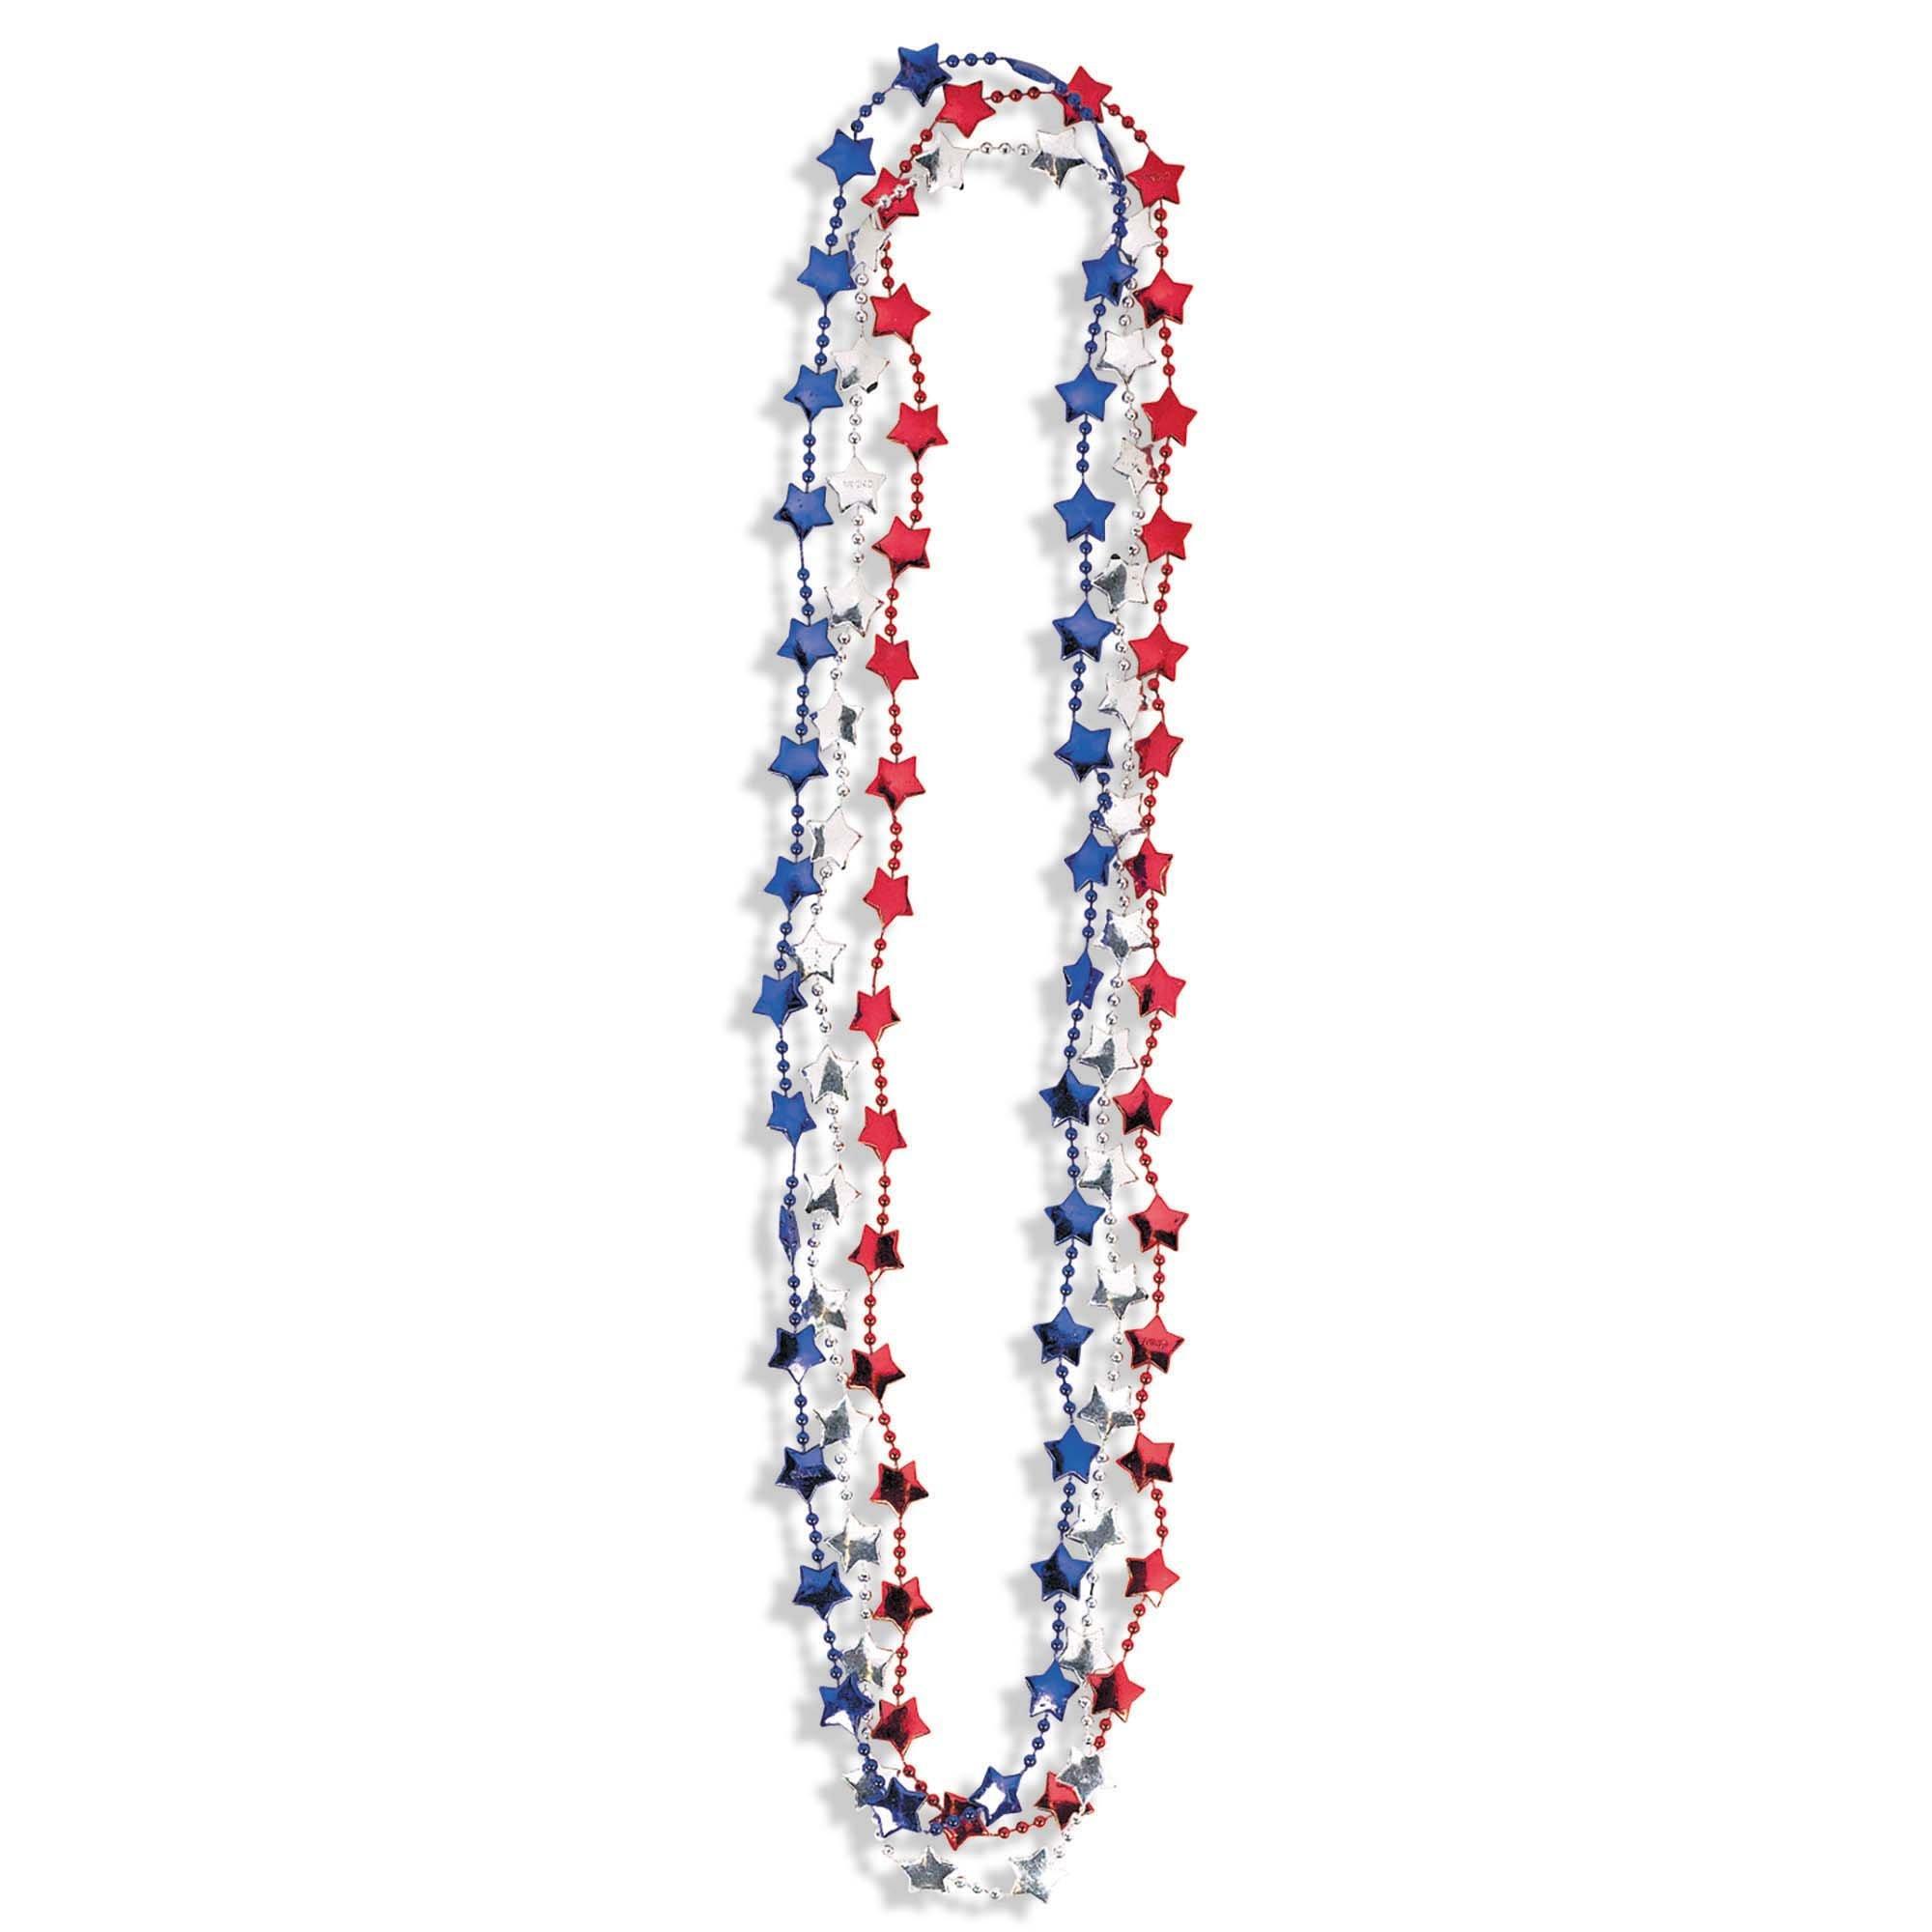 Baseball Beads Strung on a Patriotic Red, White & Blue Necklaces